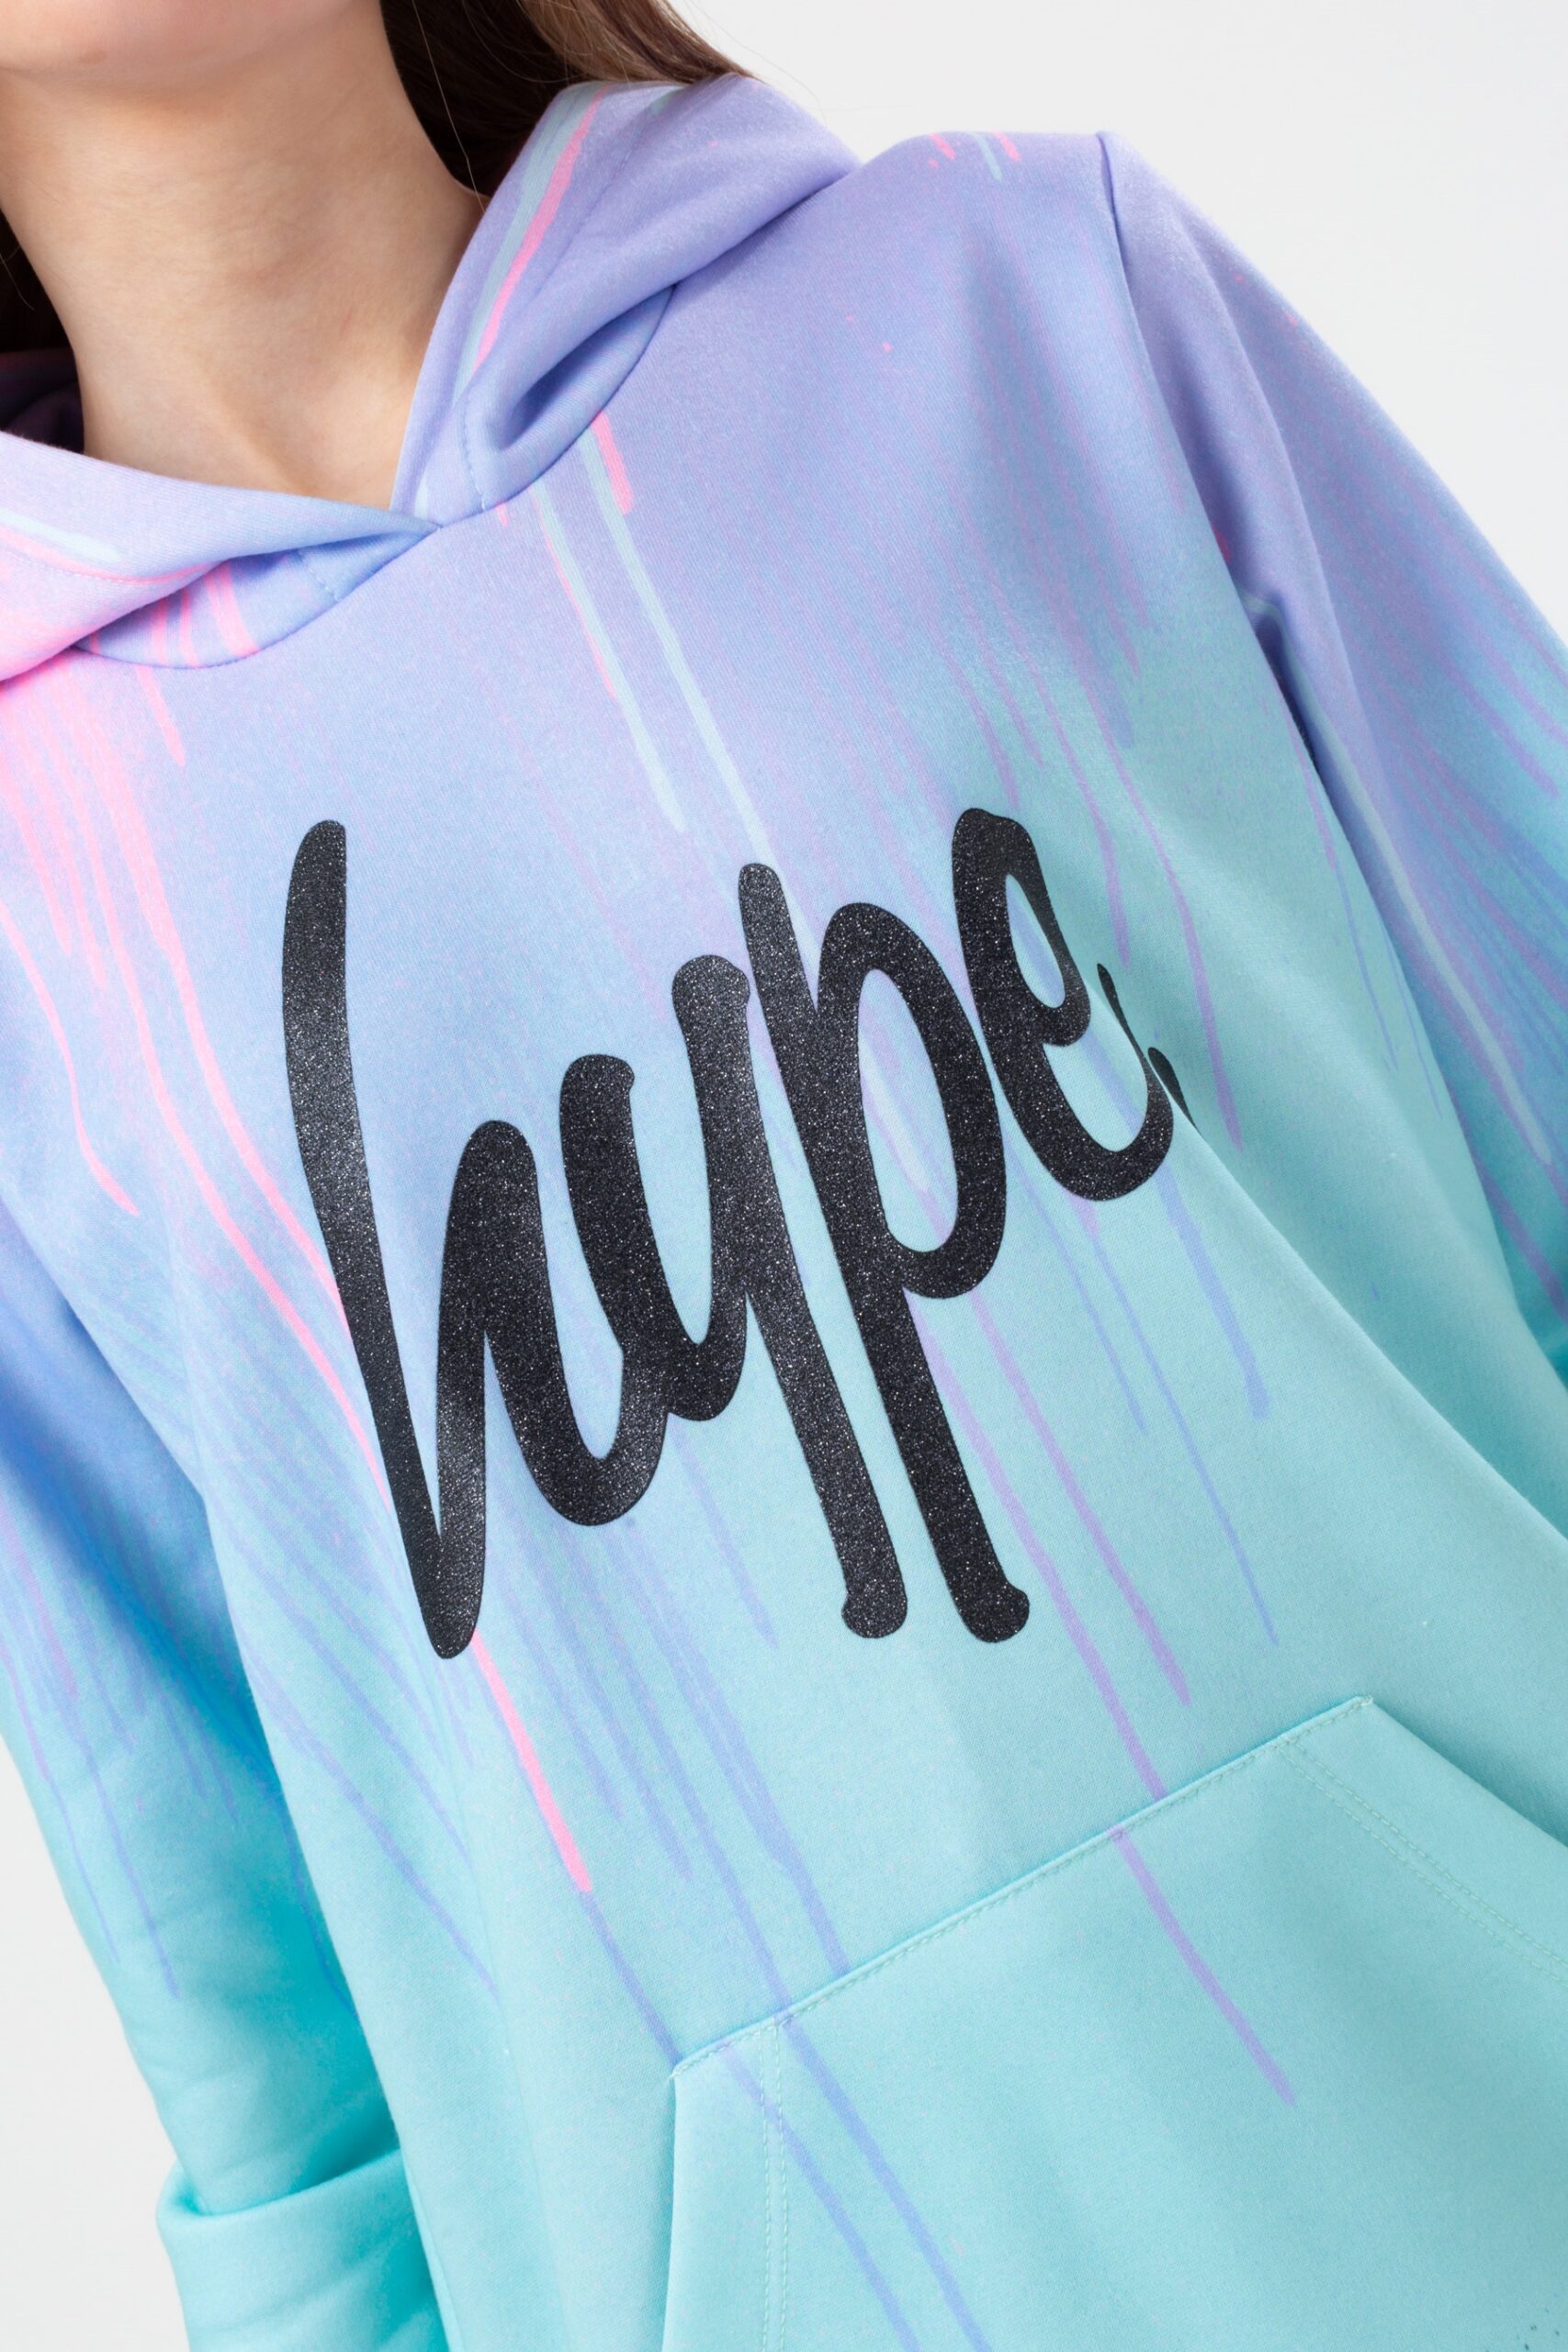 hype drip purple and turquoise hoodie close up